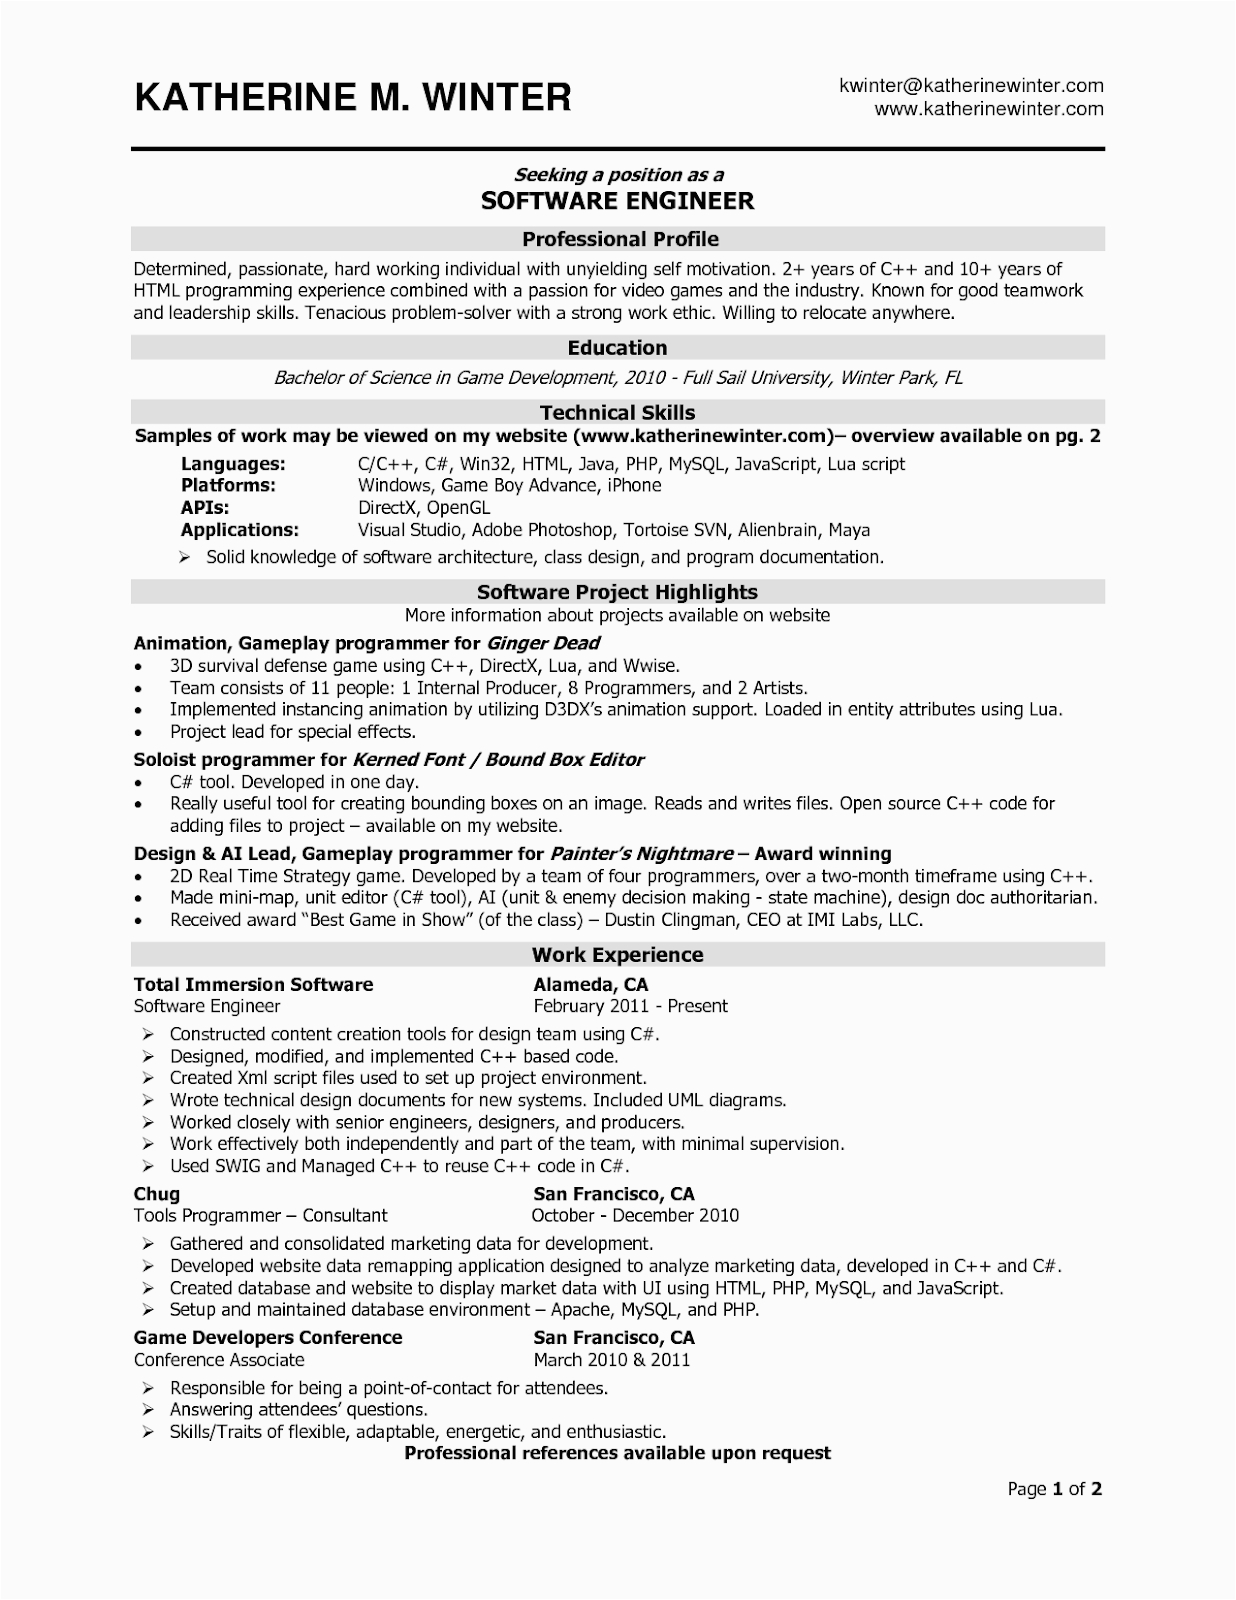 Professional Resume Samples for software Engineers software Engineer Resume Samples